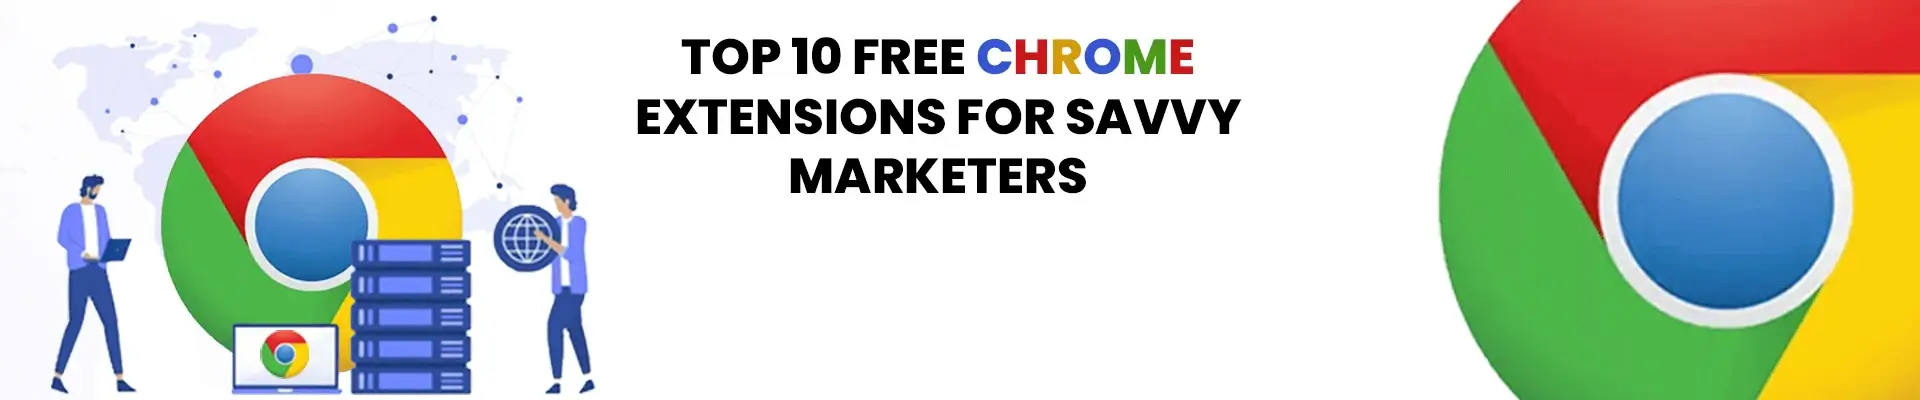 10 Best Free Chrome Extensions for Savvy Marketers [2021]